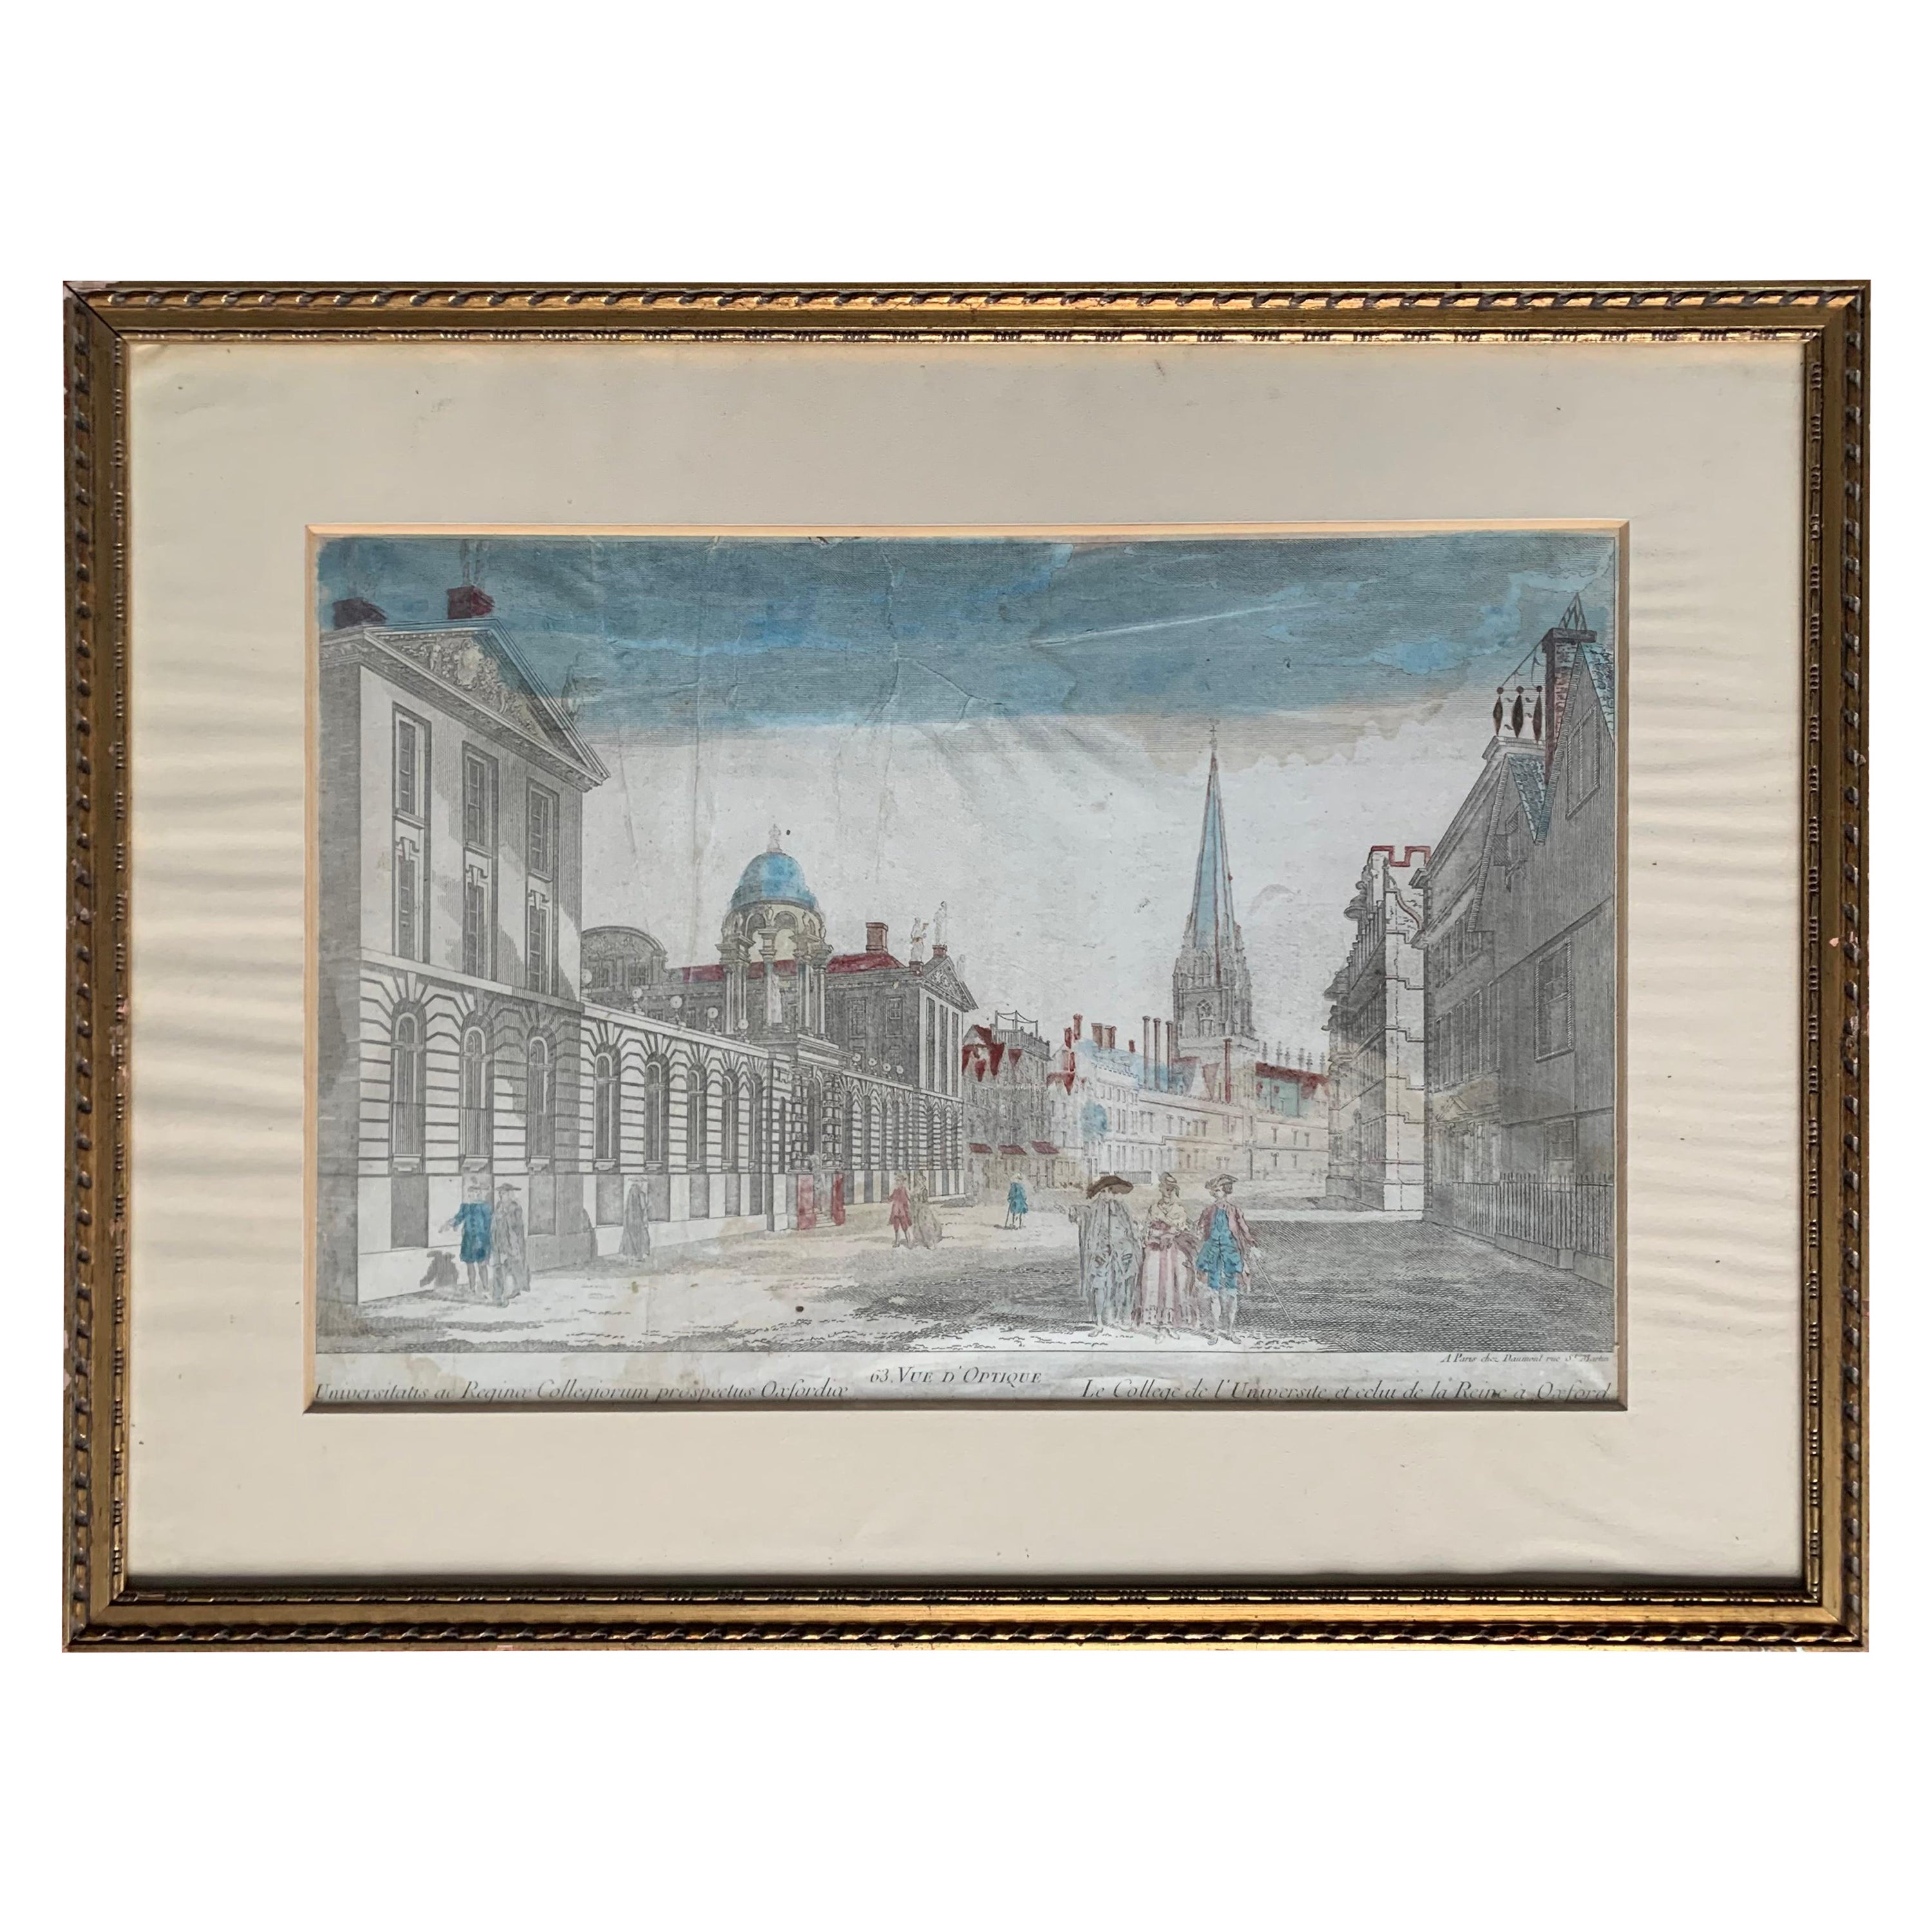 Frusotte «Optique View of the Queen’s College André Oxford University» For Sale